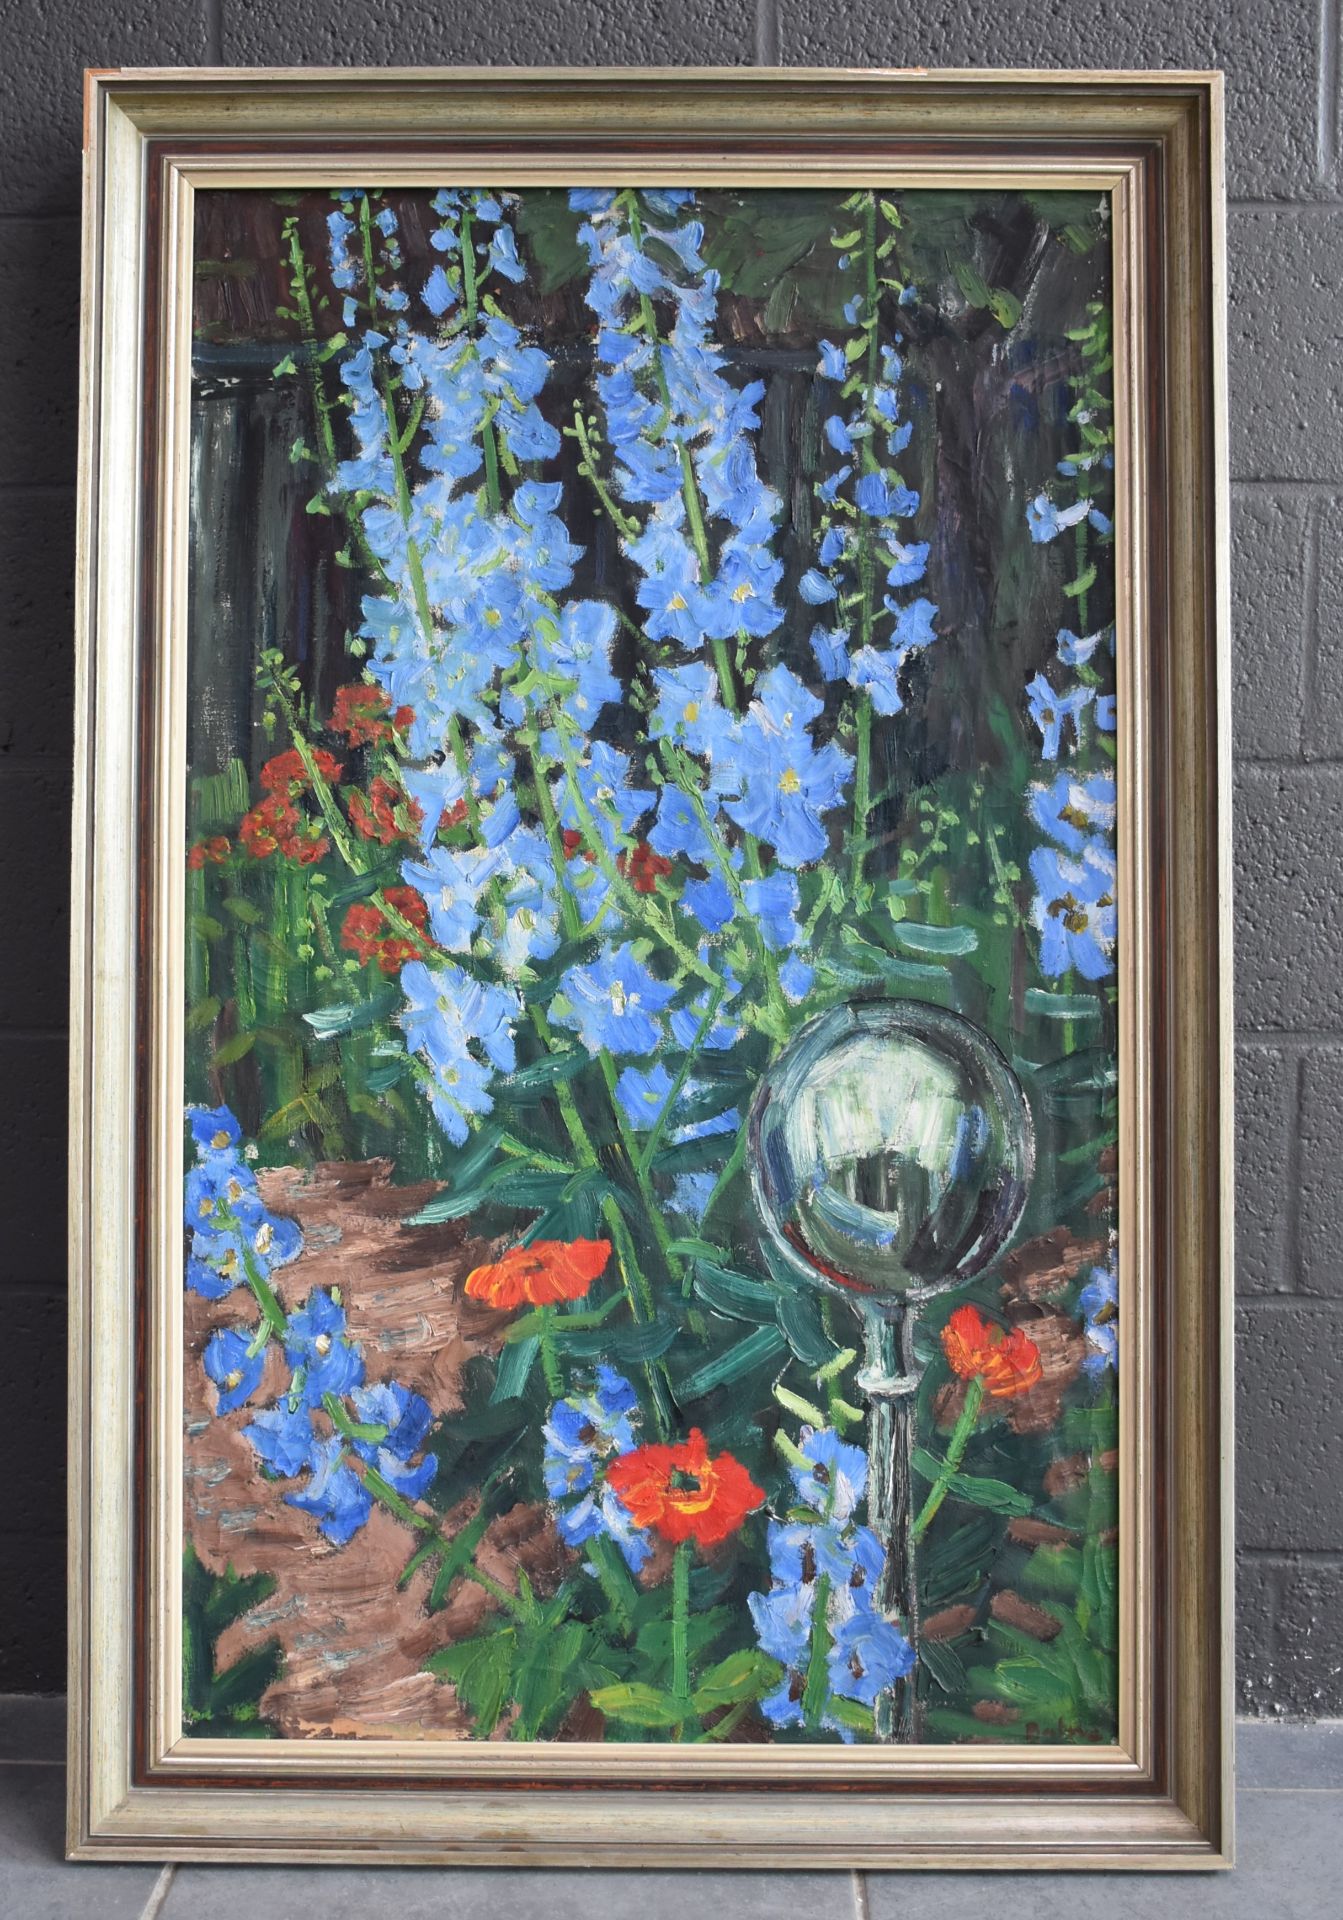 Arnold BALWE (1898-1983) Oil on canvas. The delphiniums at the entrance of the garden. Resale rights